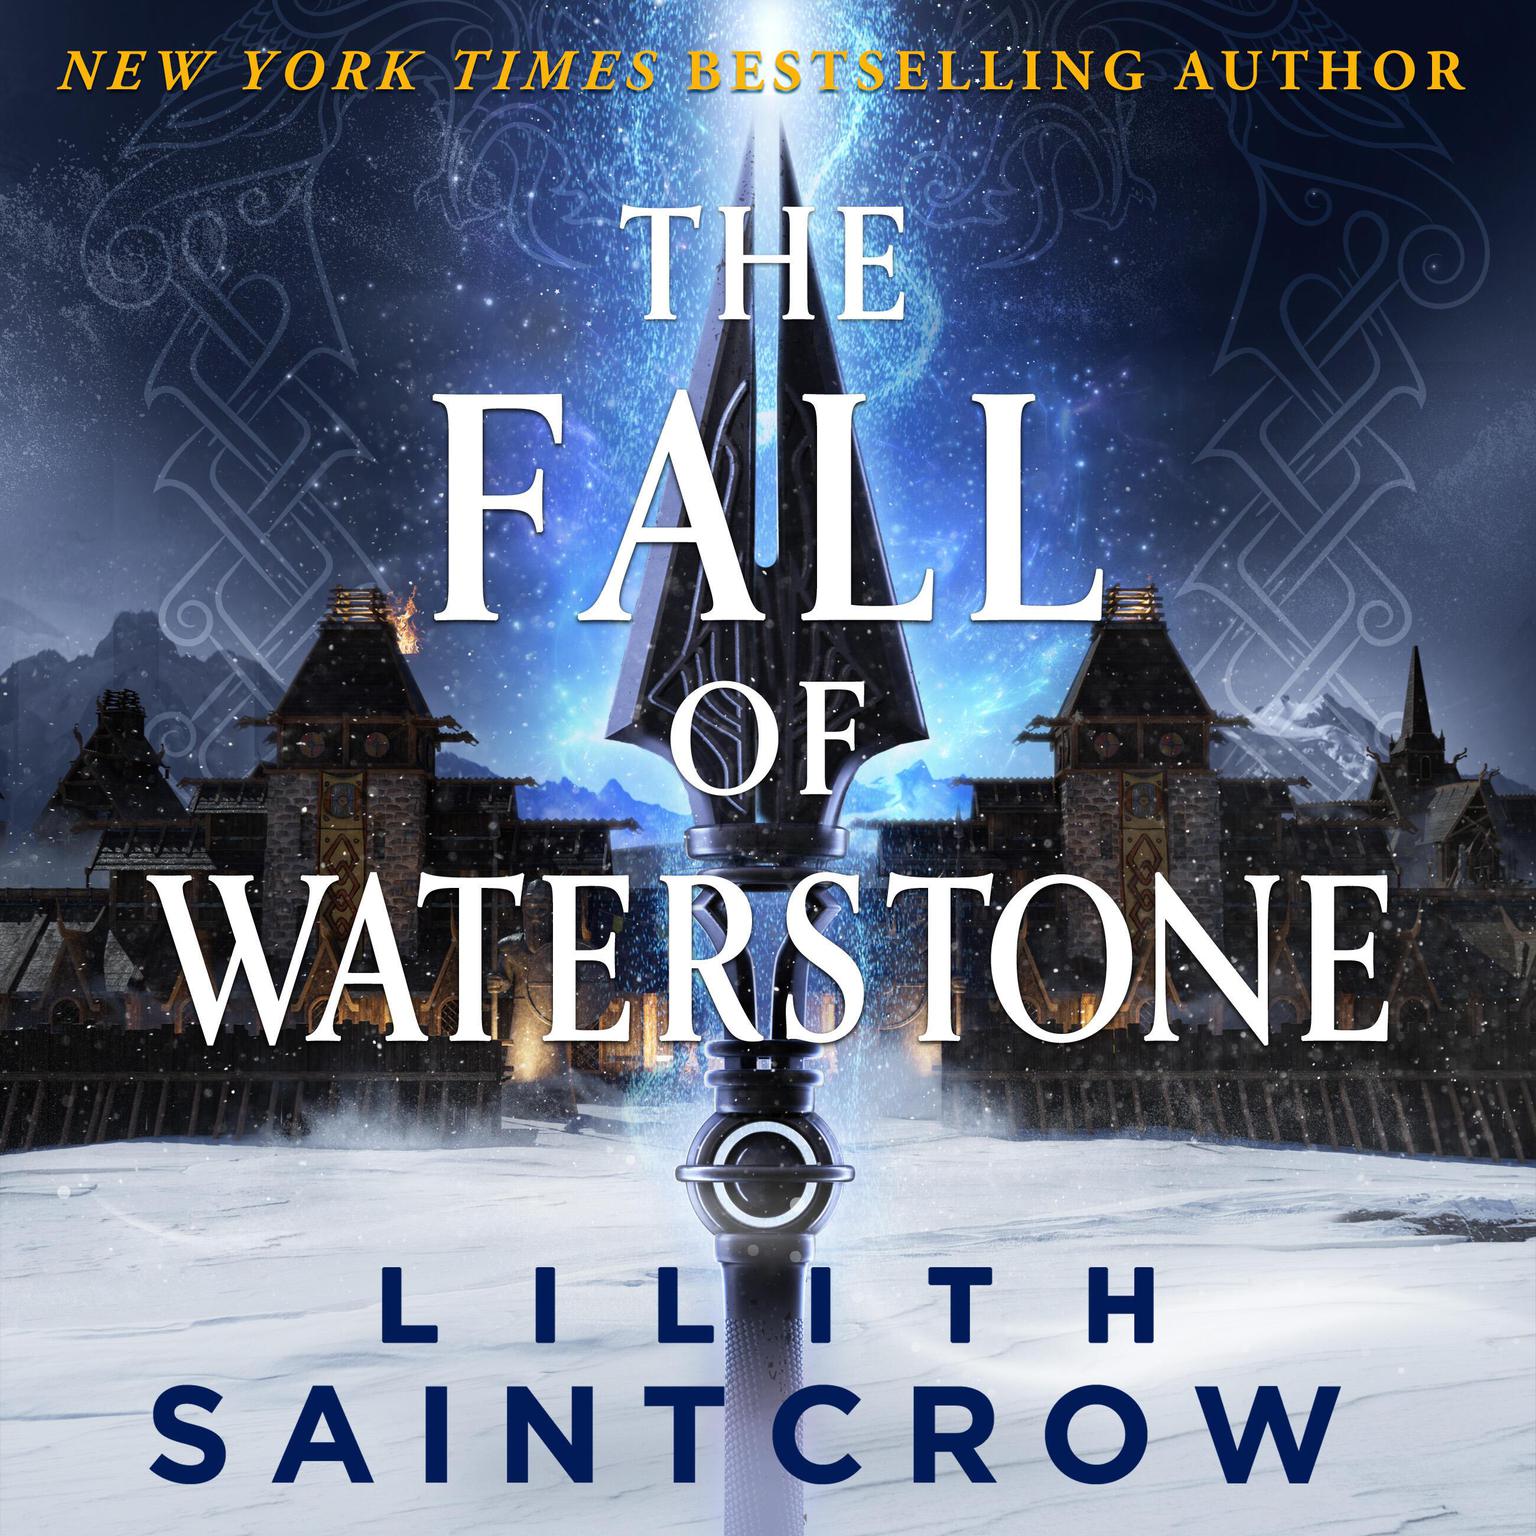 The Fall of Waterstone Audiobook, by Lilith Saintcrow